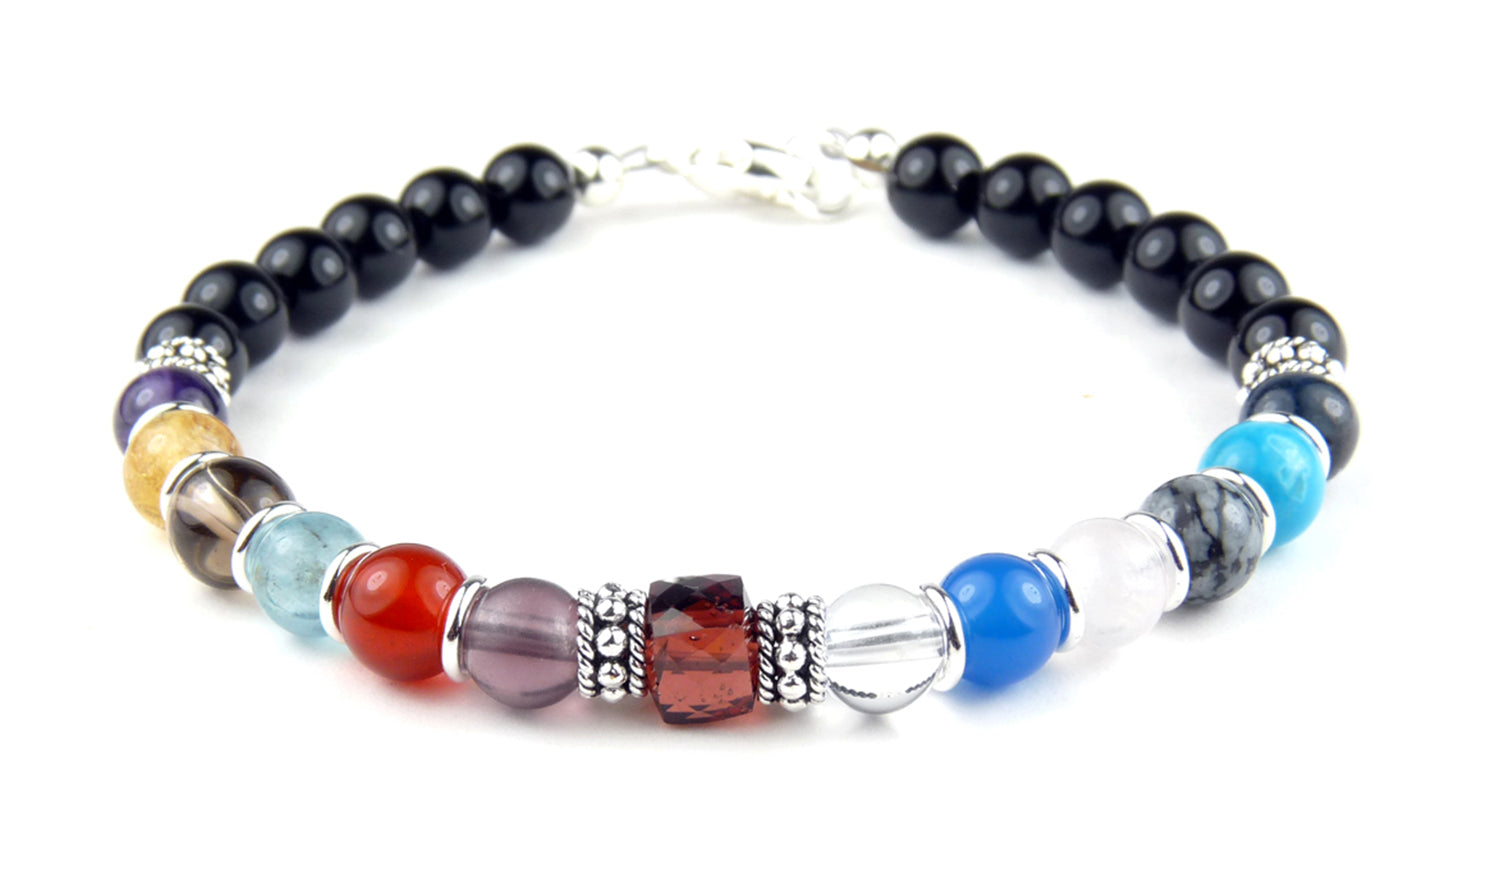 Sobriety Anniversary Bracelets with Sober Month in the Center, Spiritual Recovery, AA Gifts